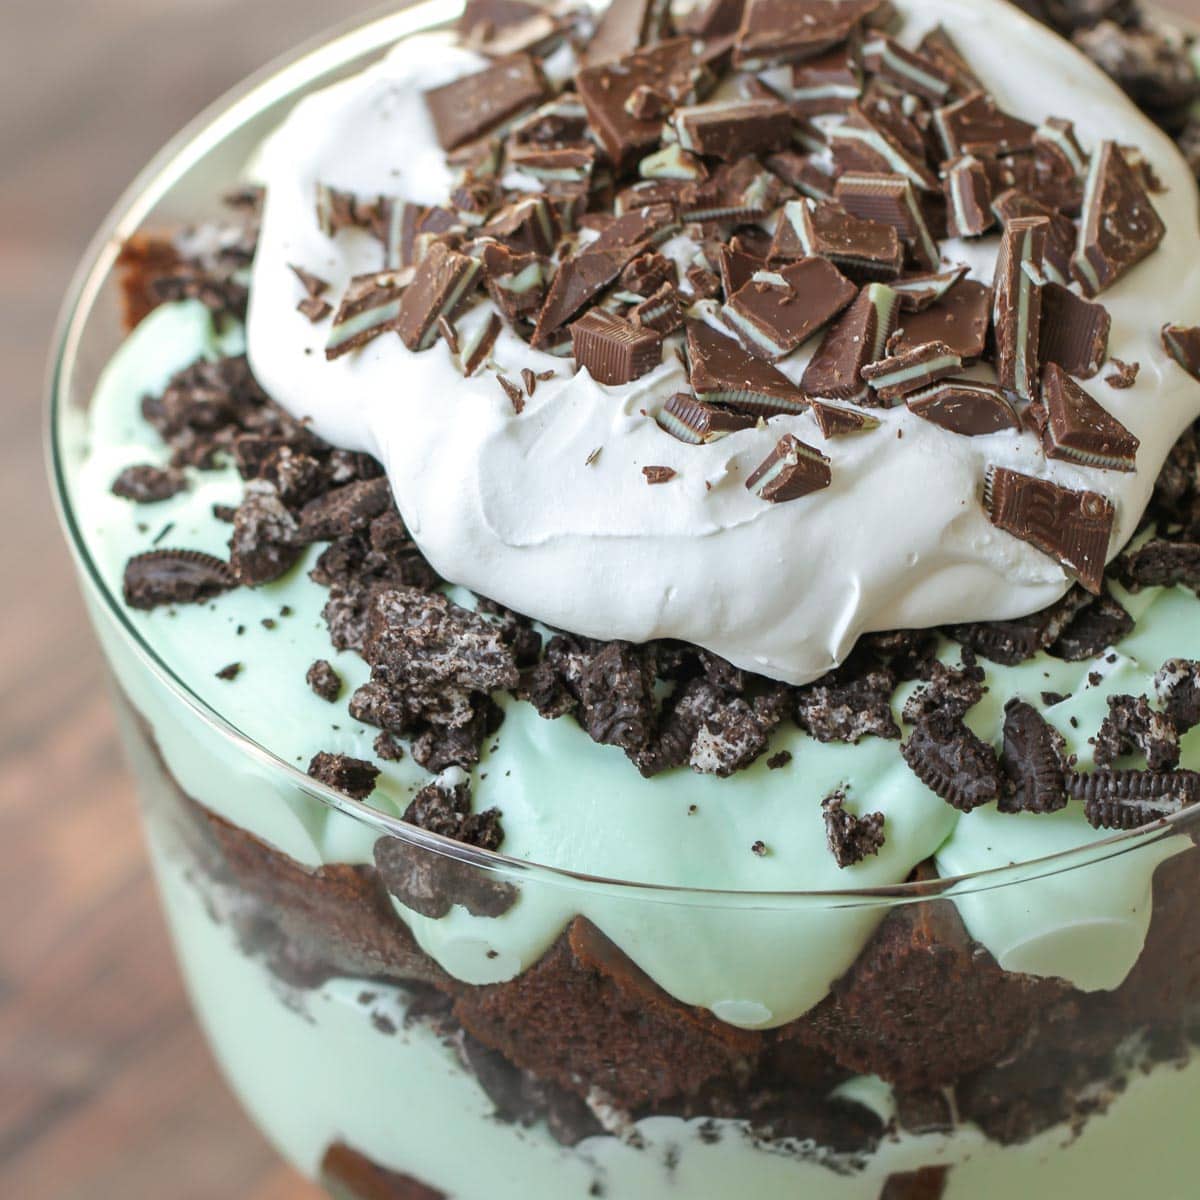 Andes mint trifle in a trifle dish